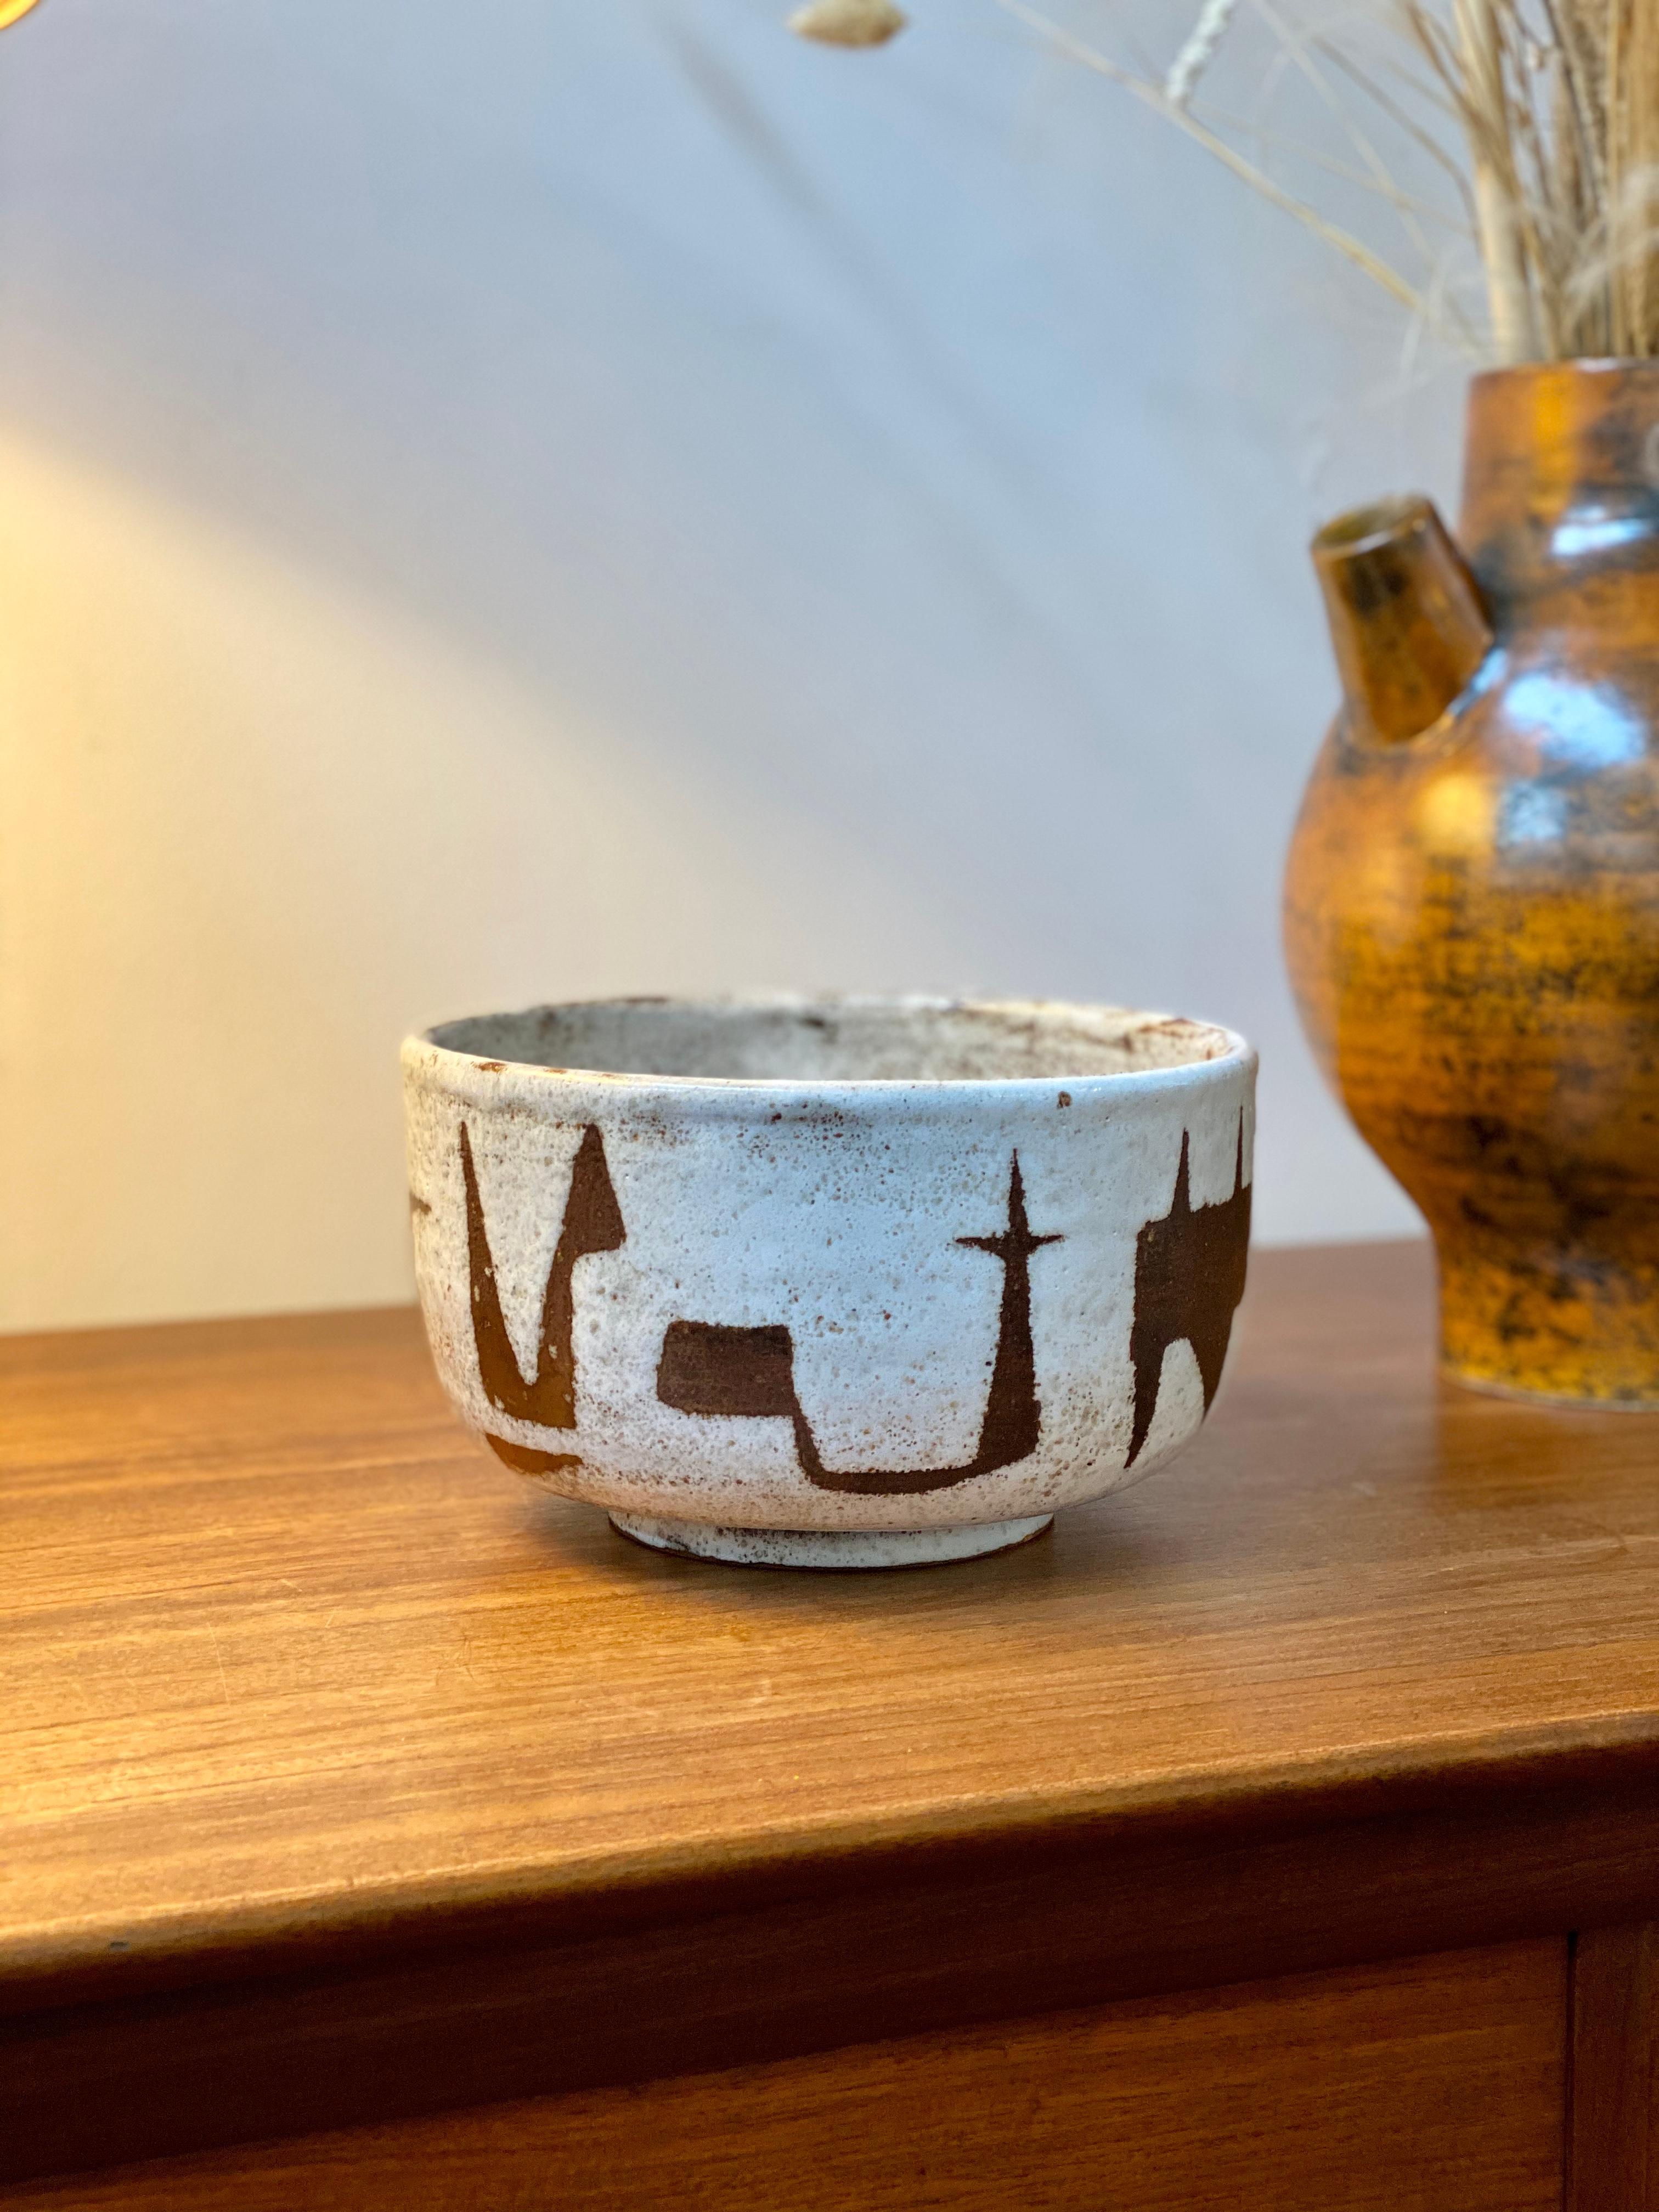 Midcentury French ceramic bowl by Jean Rivier (circa 1960s). A stunning, modern design earthenware bowl in off-white with chocolate brown zoomorphic shapes. The figures are reminiscent of Prehistoric African art and surround the exterior of the